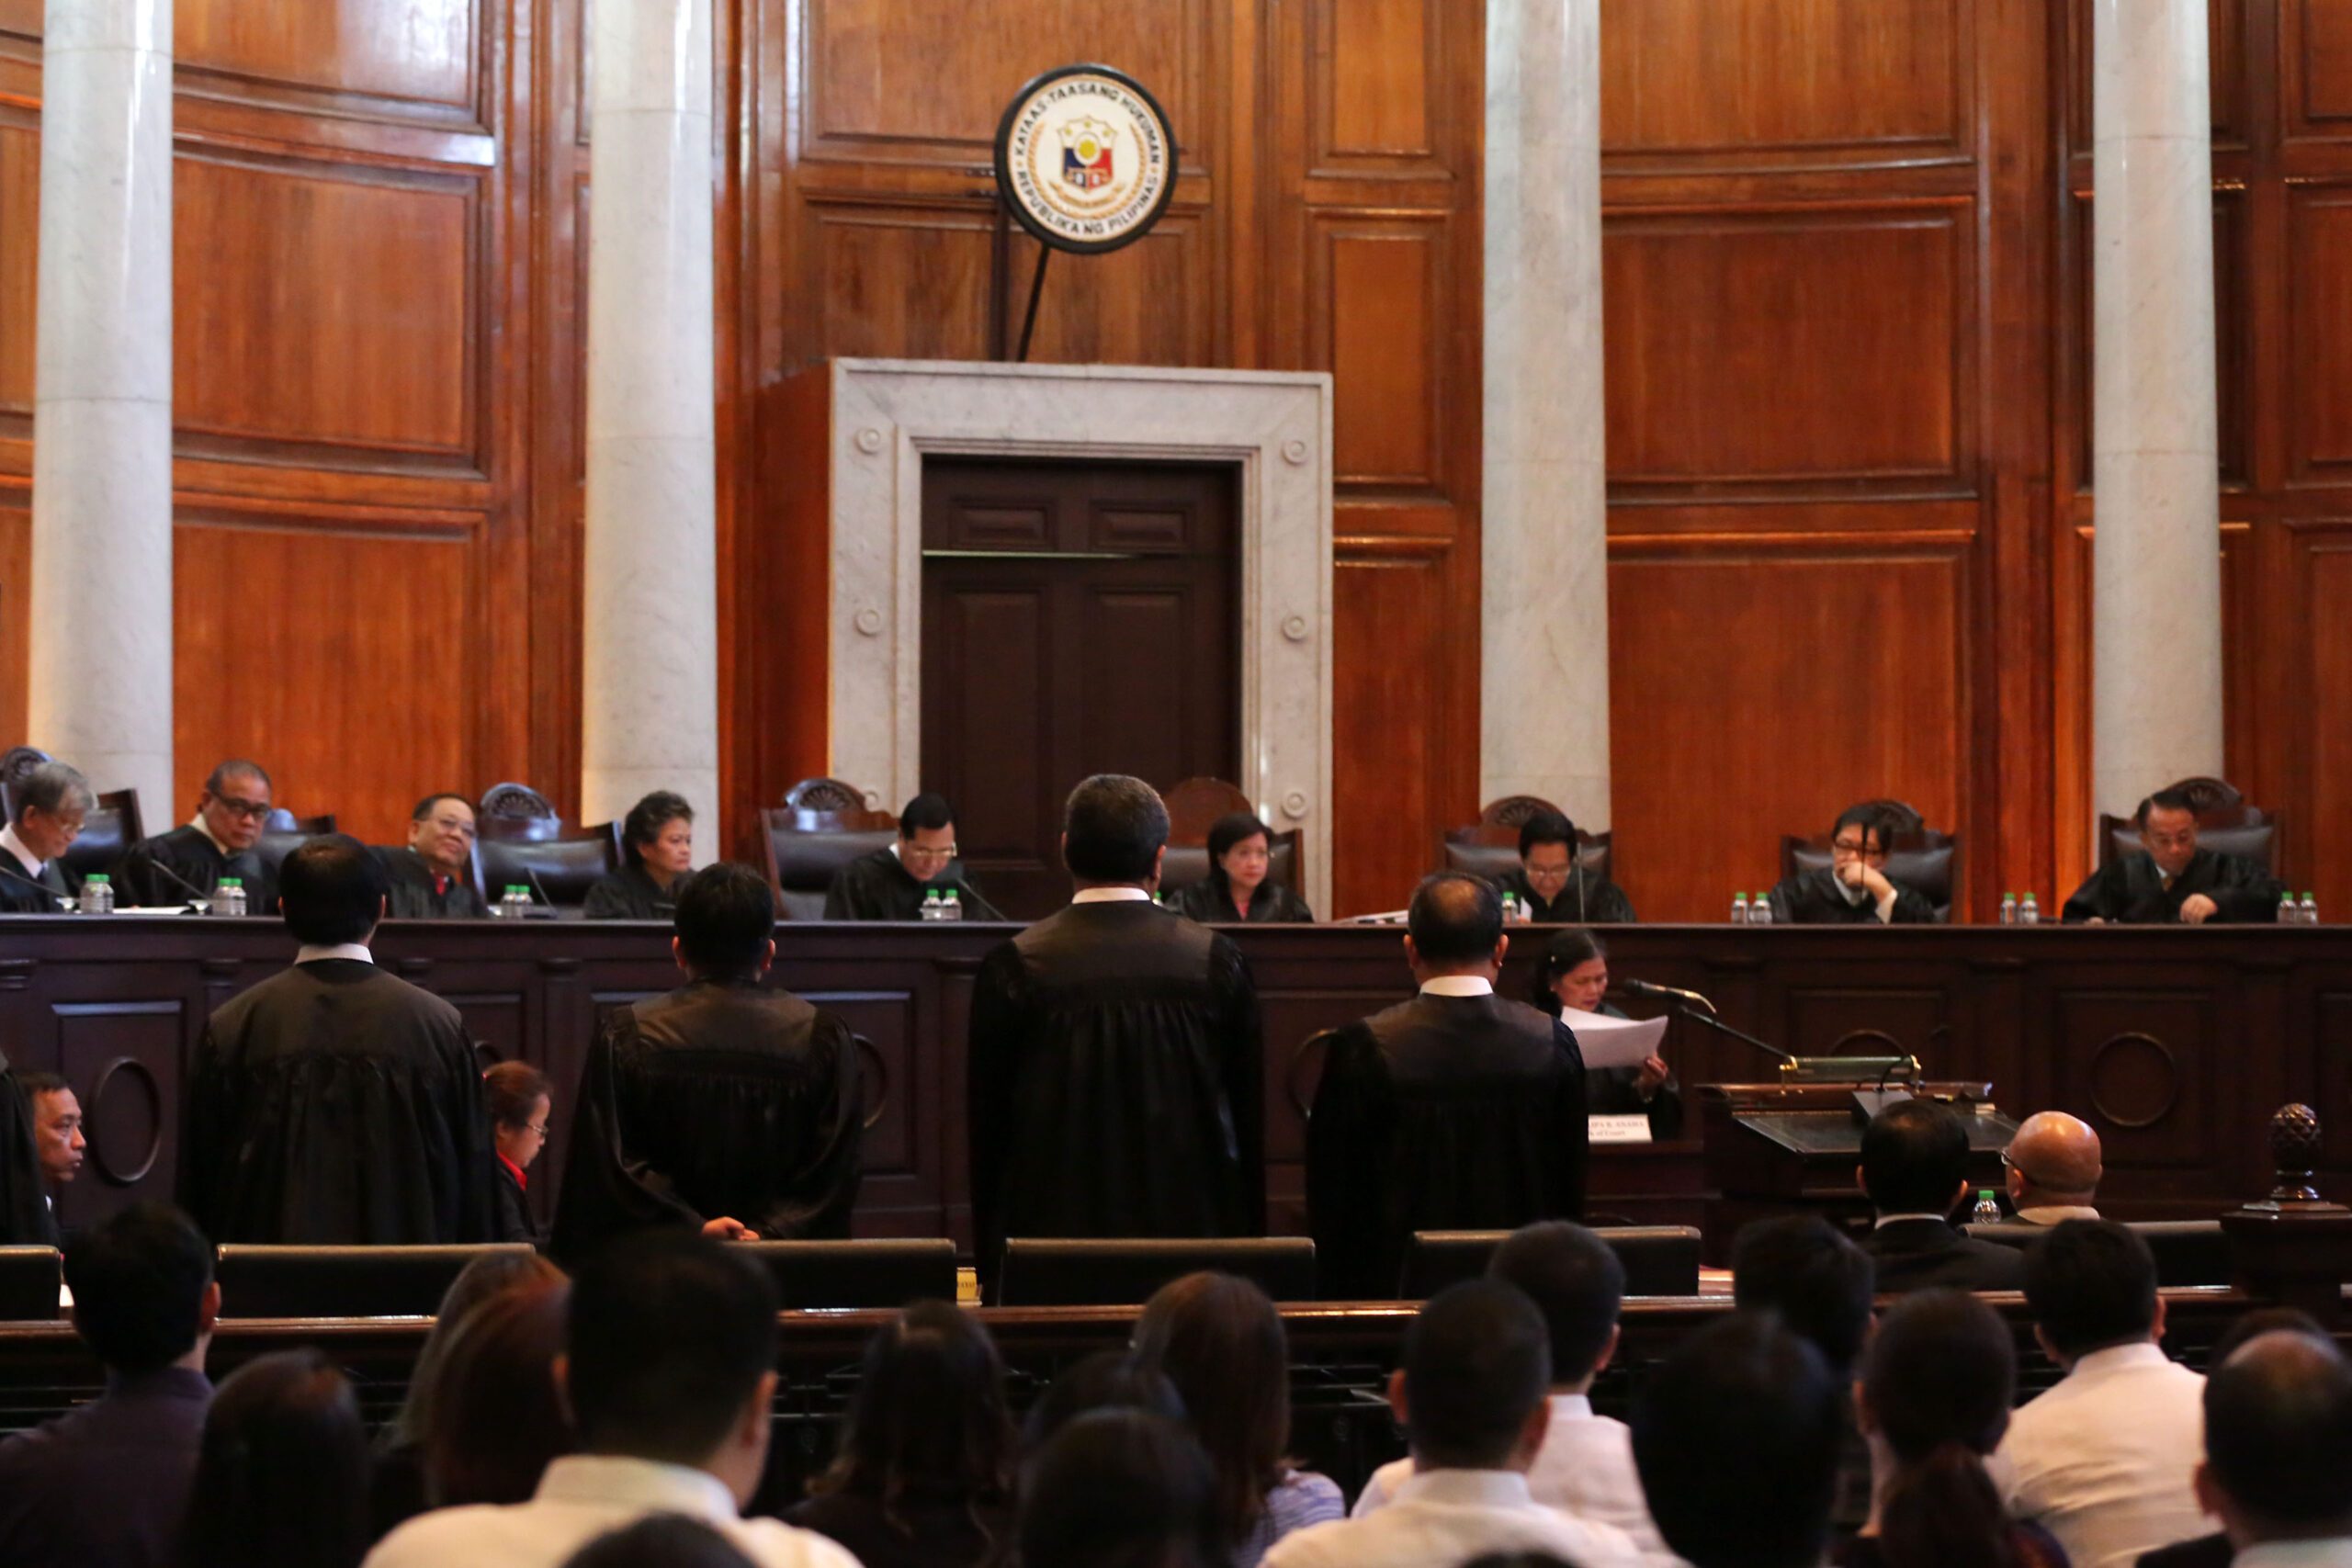 Sereno to Poe camp: Show possible implication of case on foundlings